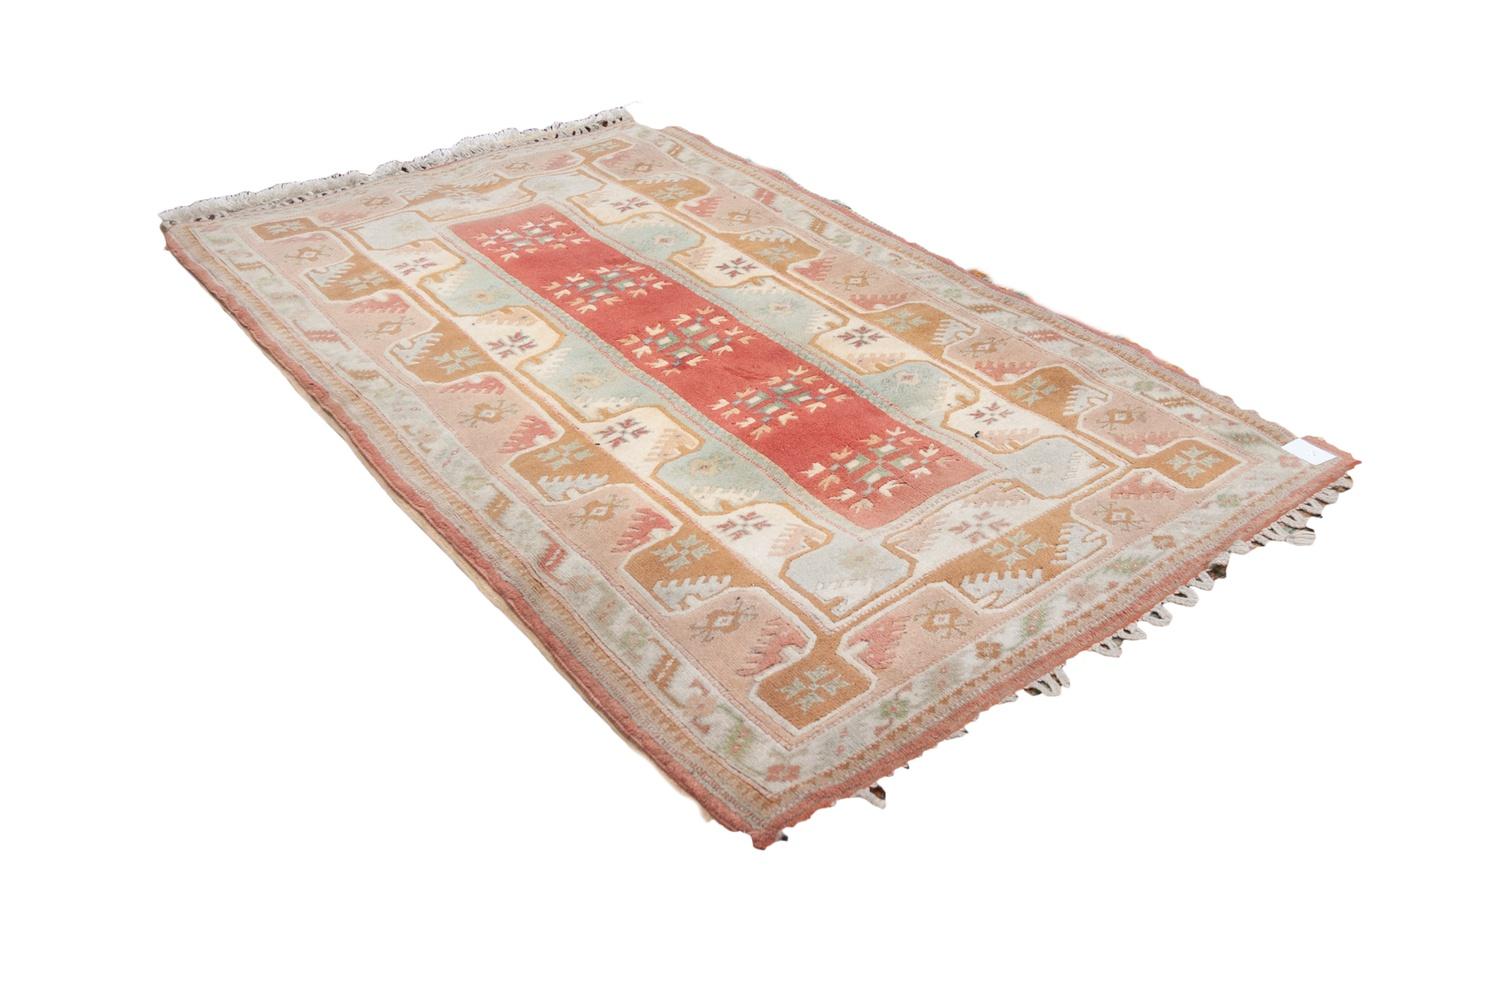 TURKISH LARGE ALL-WOOL EMBOSSED RUG, with a narrow salmon pink central panel with five square repeat